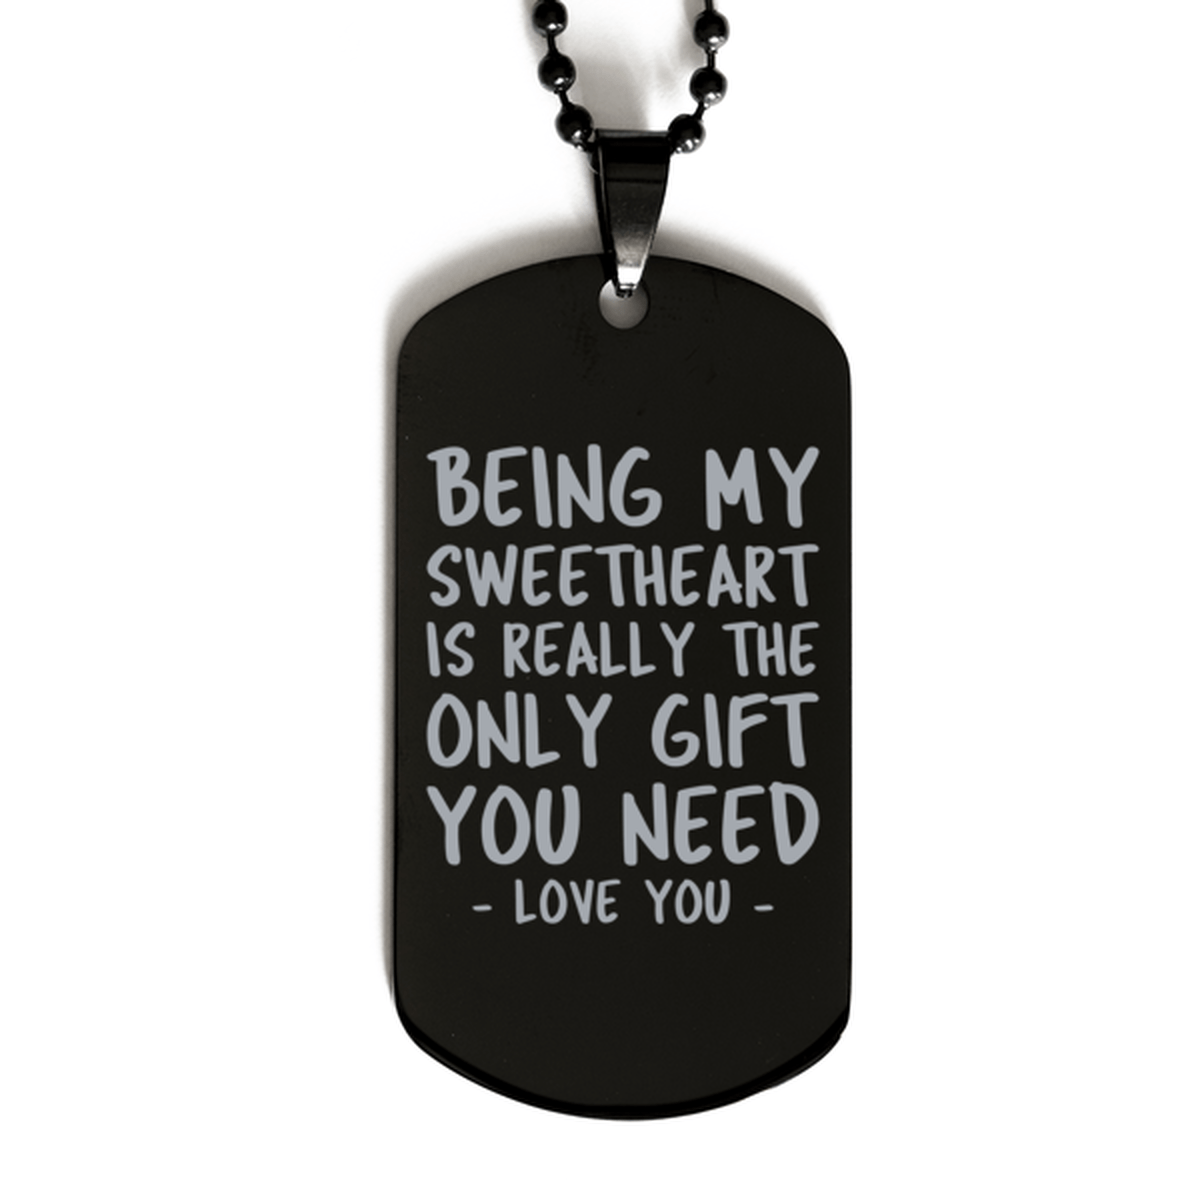 Funny Sweetheart Black Dog Tag Necklace, Being My Sweetheart Is Really the Only Gift You Need, Best Birthday Gifts for Sweetheart